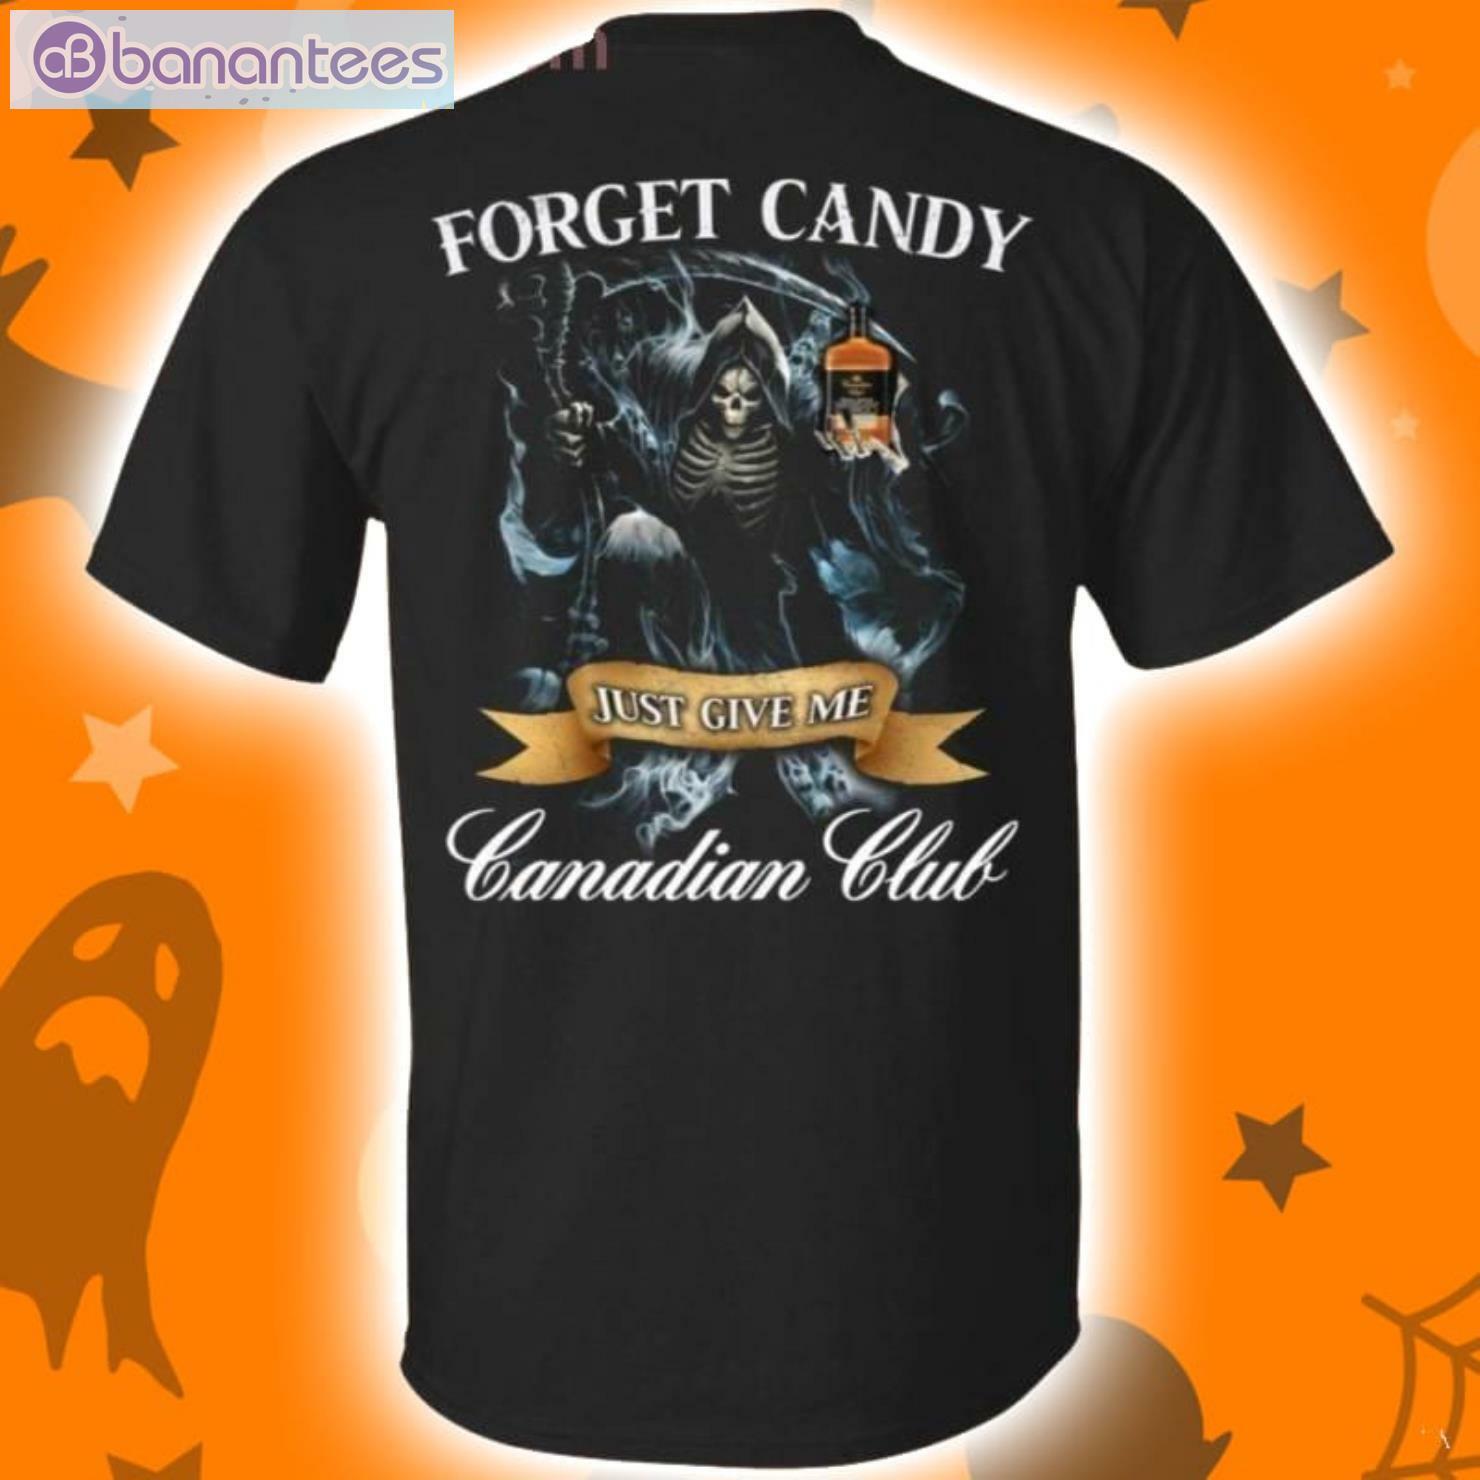 Forget Candy Just Give Me Canadian Club Whiskey Halloween T-Shirt Product Photo 1 Product photo 1